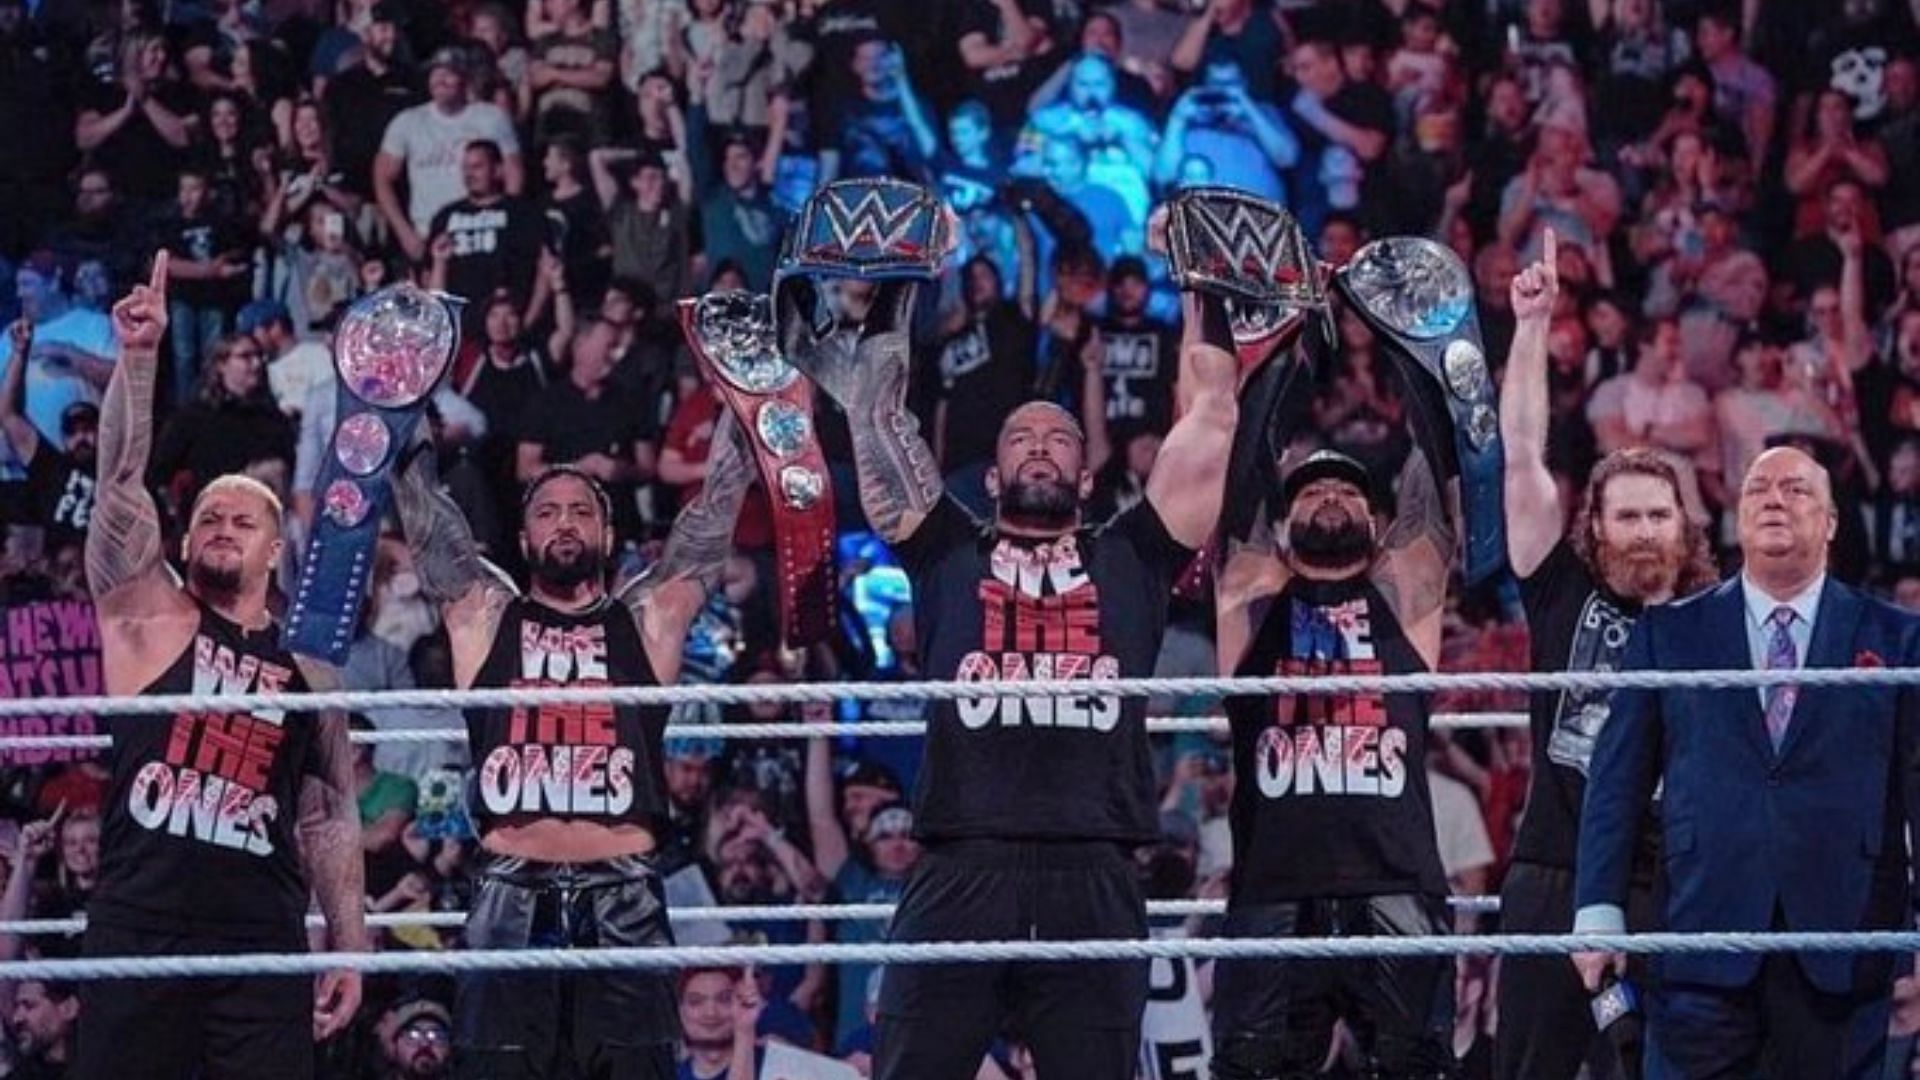 The Bloodline is regarded as one of the most dominant factions in modern WWE history